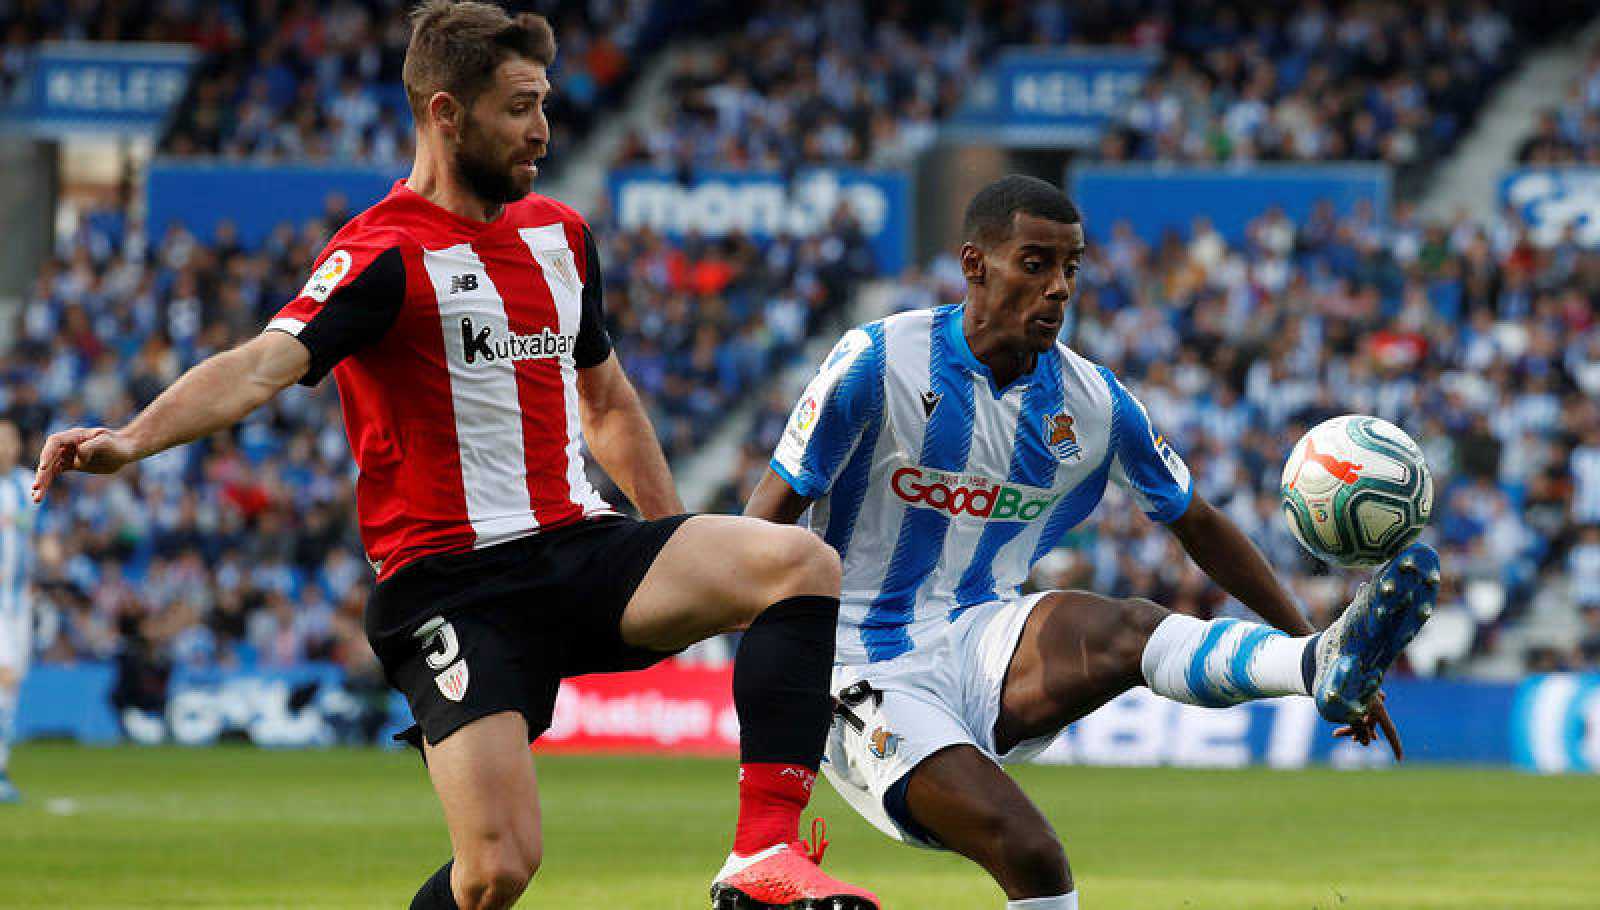 Athletic Bilbao vs Real Sociedad Preview, Tips and Odds - Sportingpedia - Latest Sports News From All Over the World